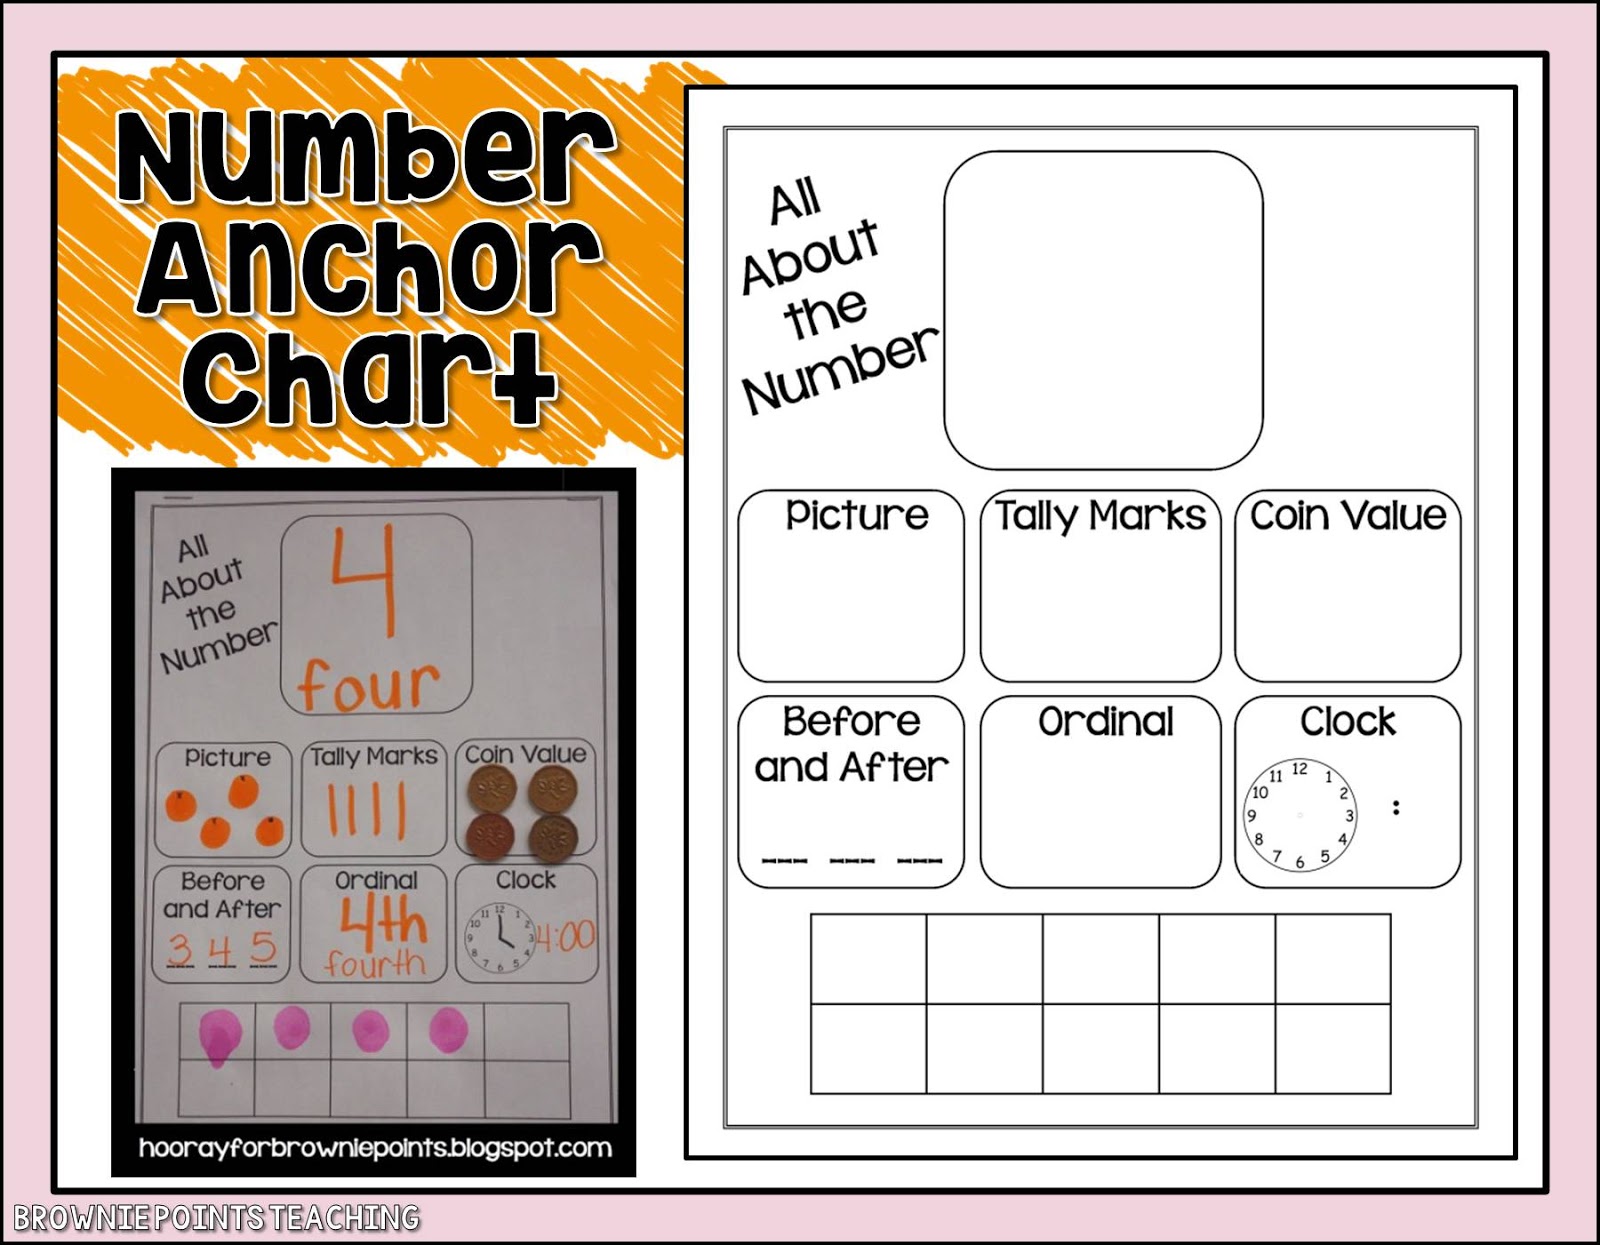 Number Anchor Chart | Brownie Points